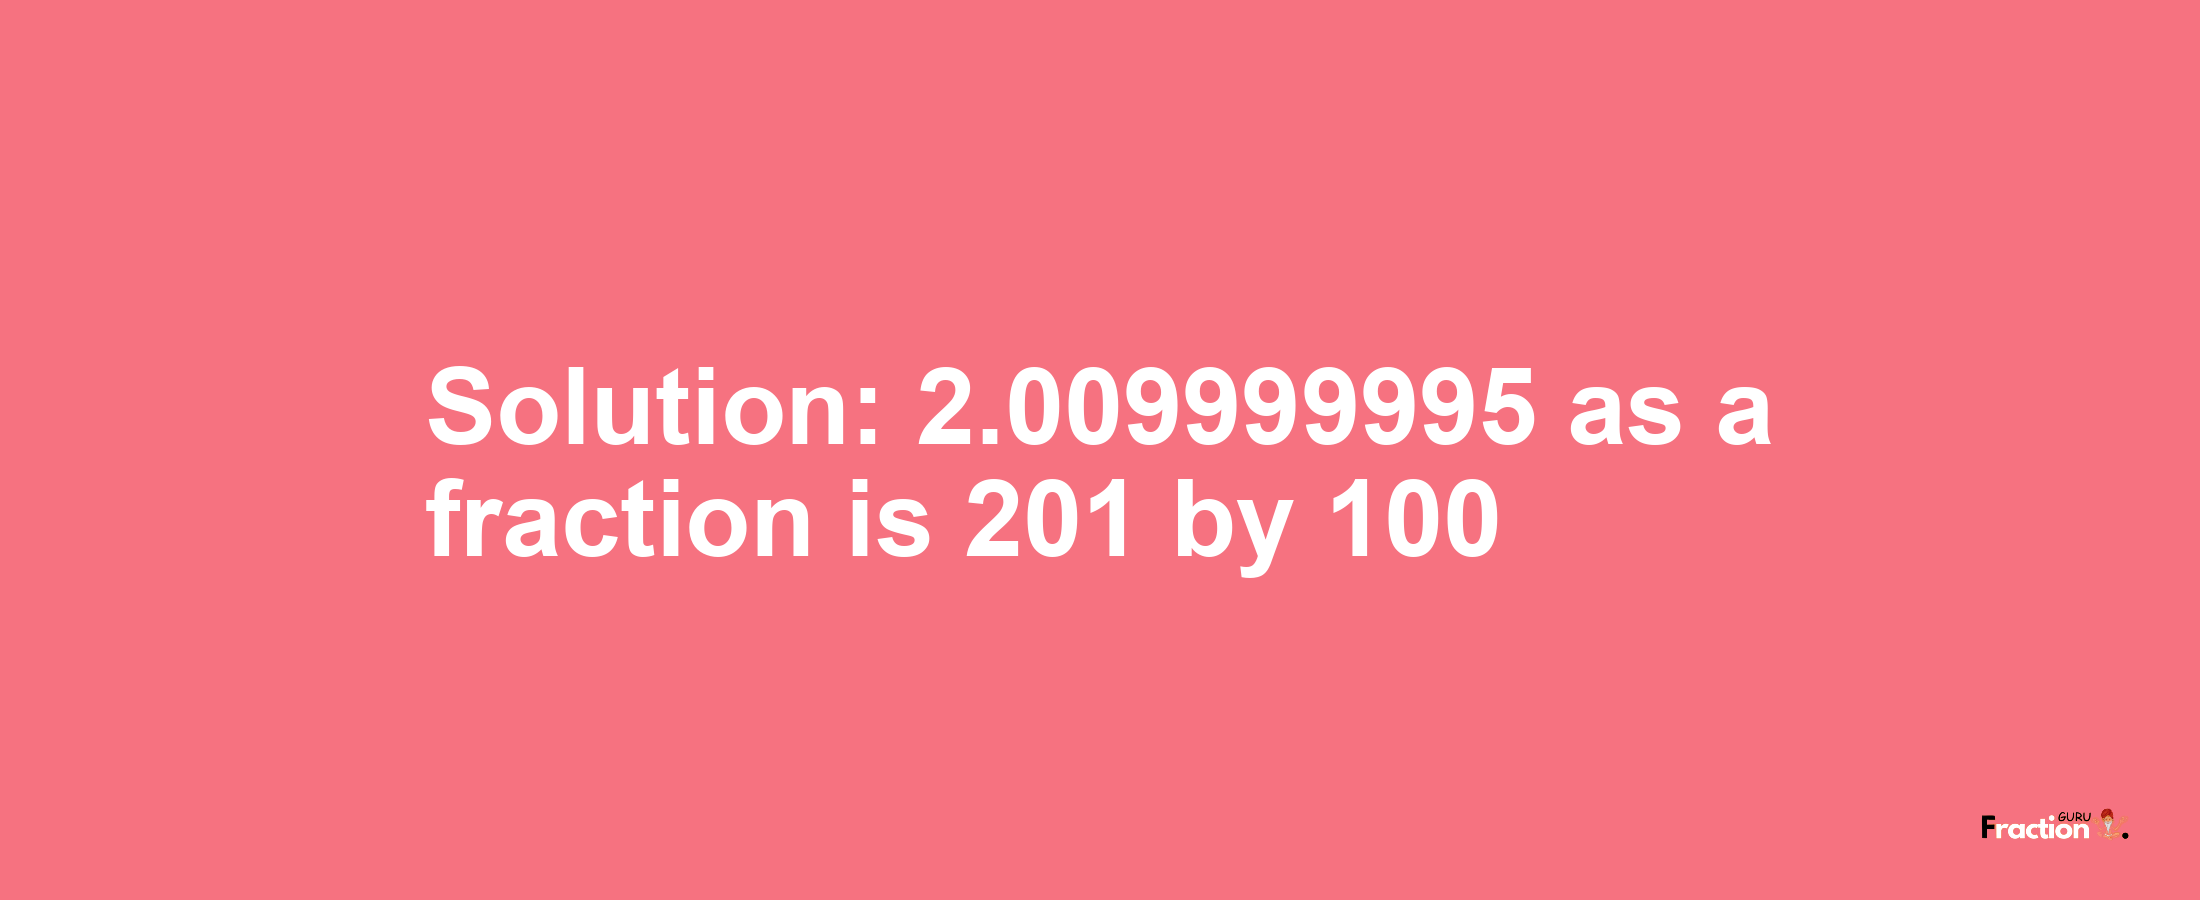 Solution:2.009999995 as a fraction is 201/100